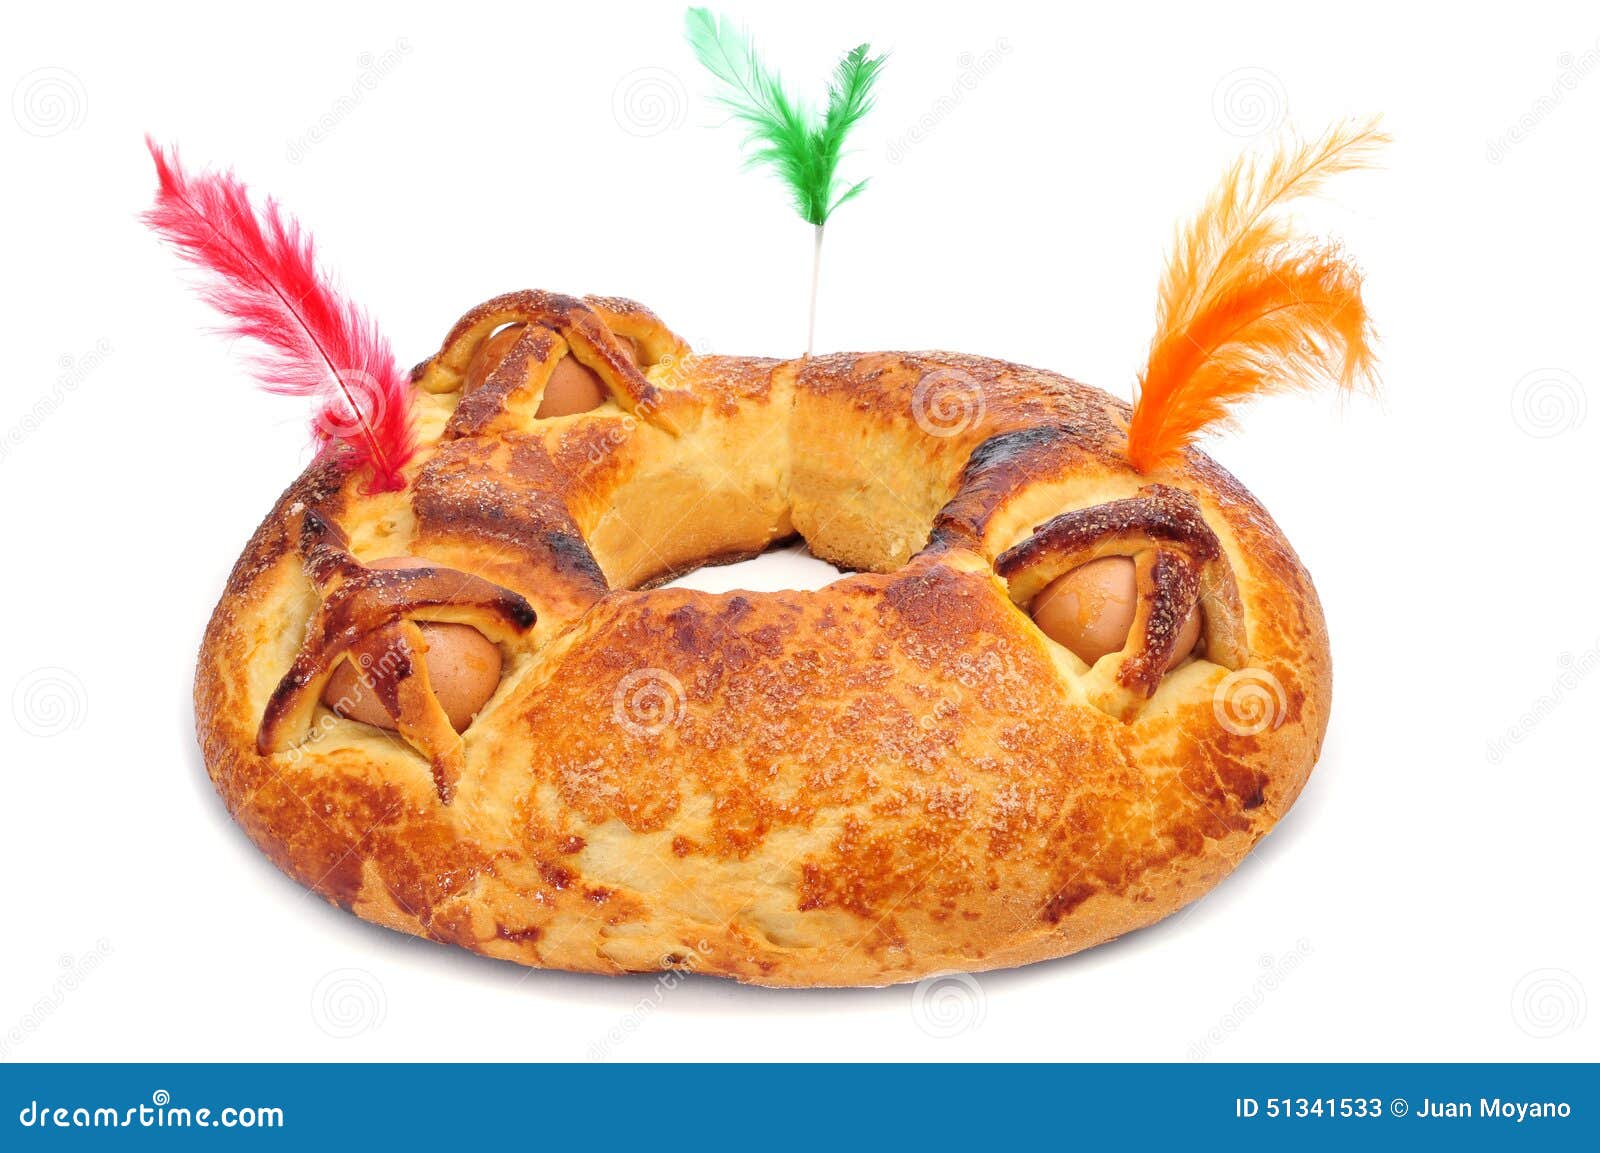 traditional mona de pascua typical in spain, a cake with boiled